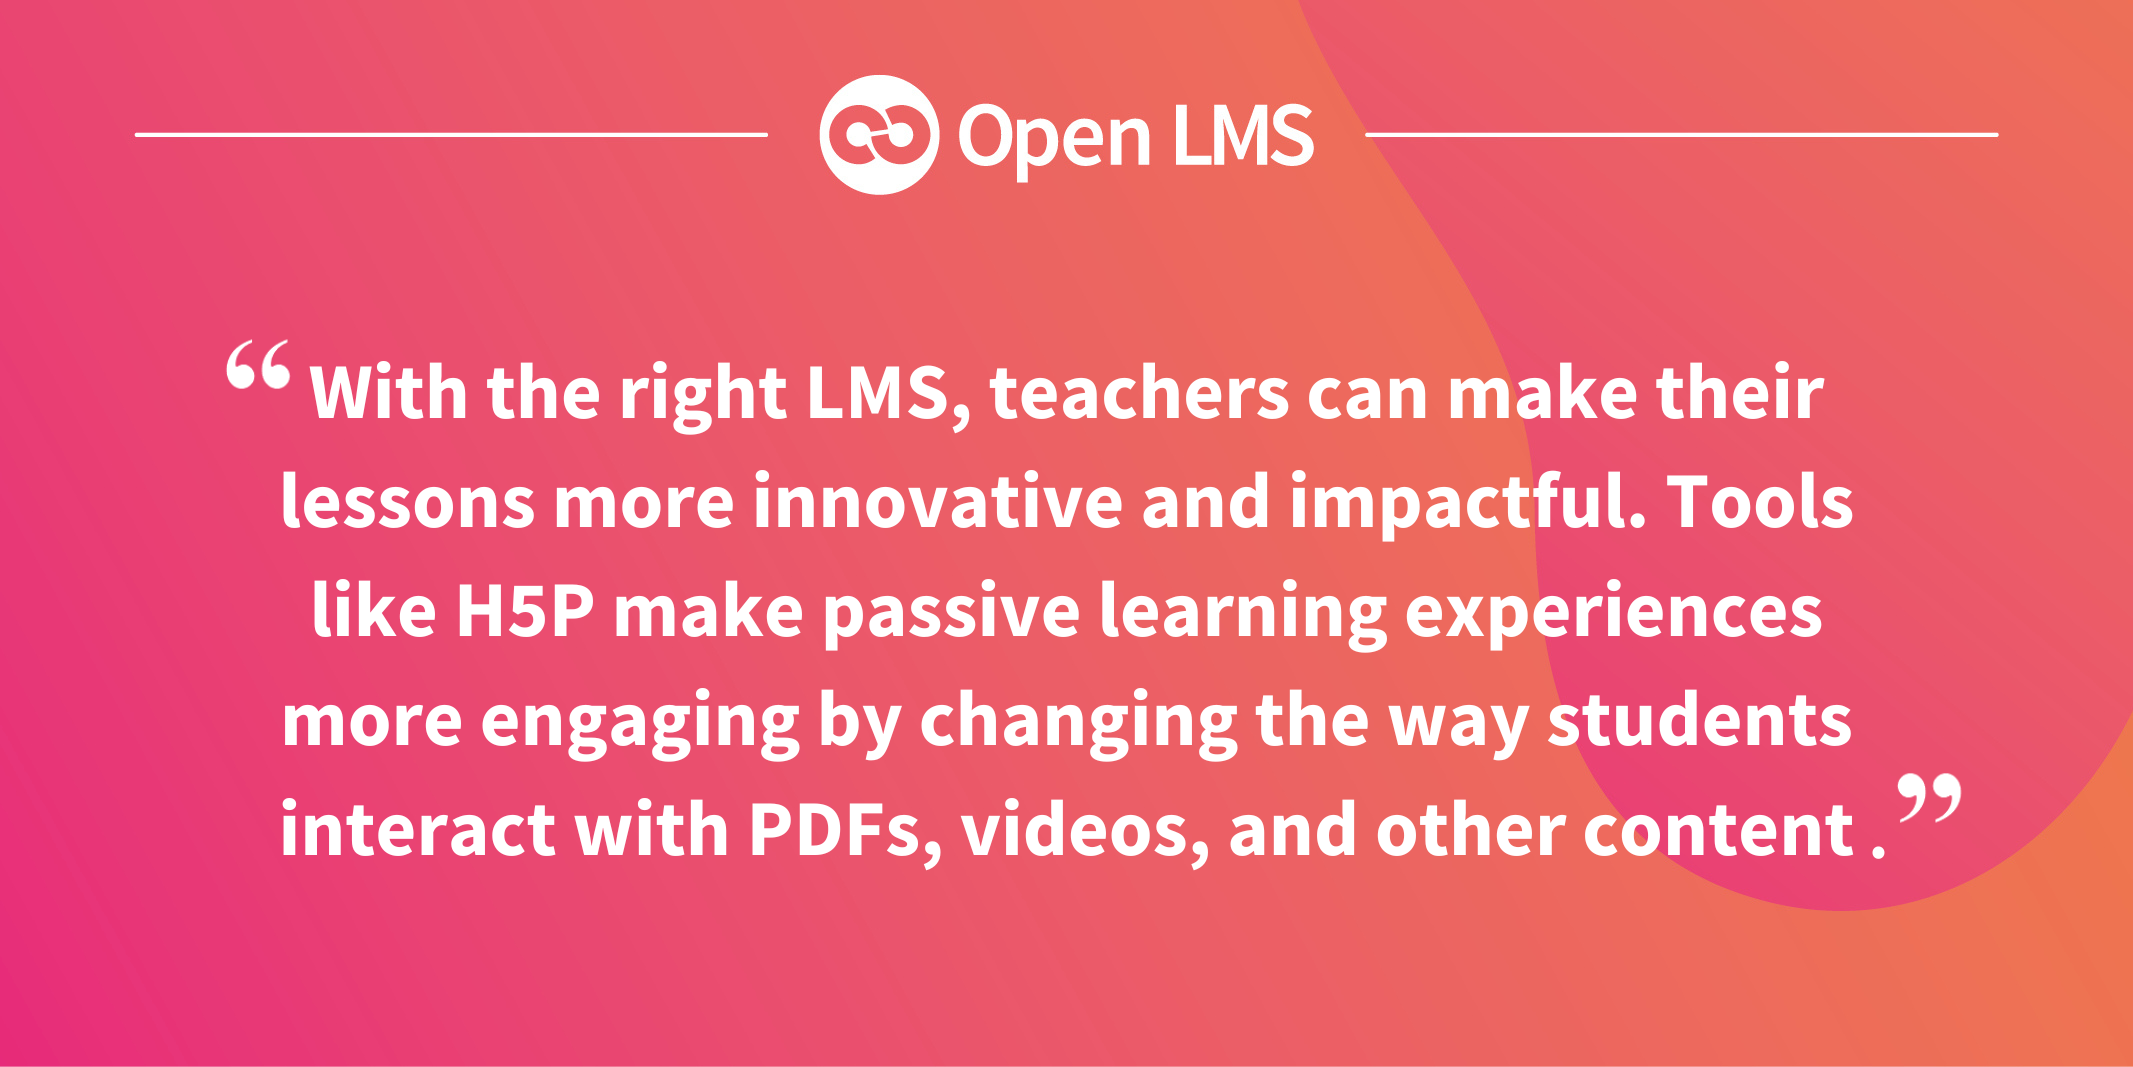 With the right LMS, teachers can make their lessons more innovative and impactful. Tools like H5P make passive learning experiences more engaging by changing the way students interact with PDFs, videos, and other content